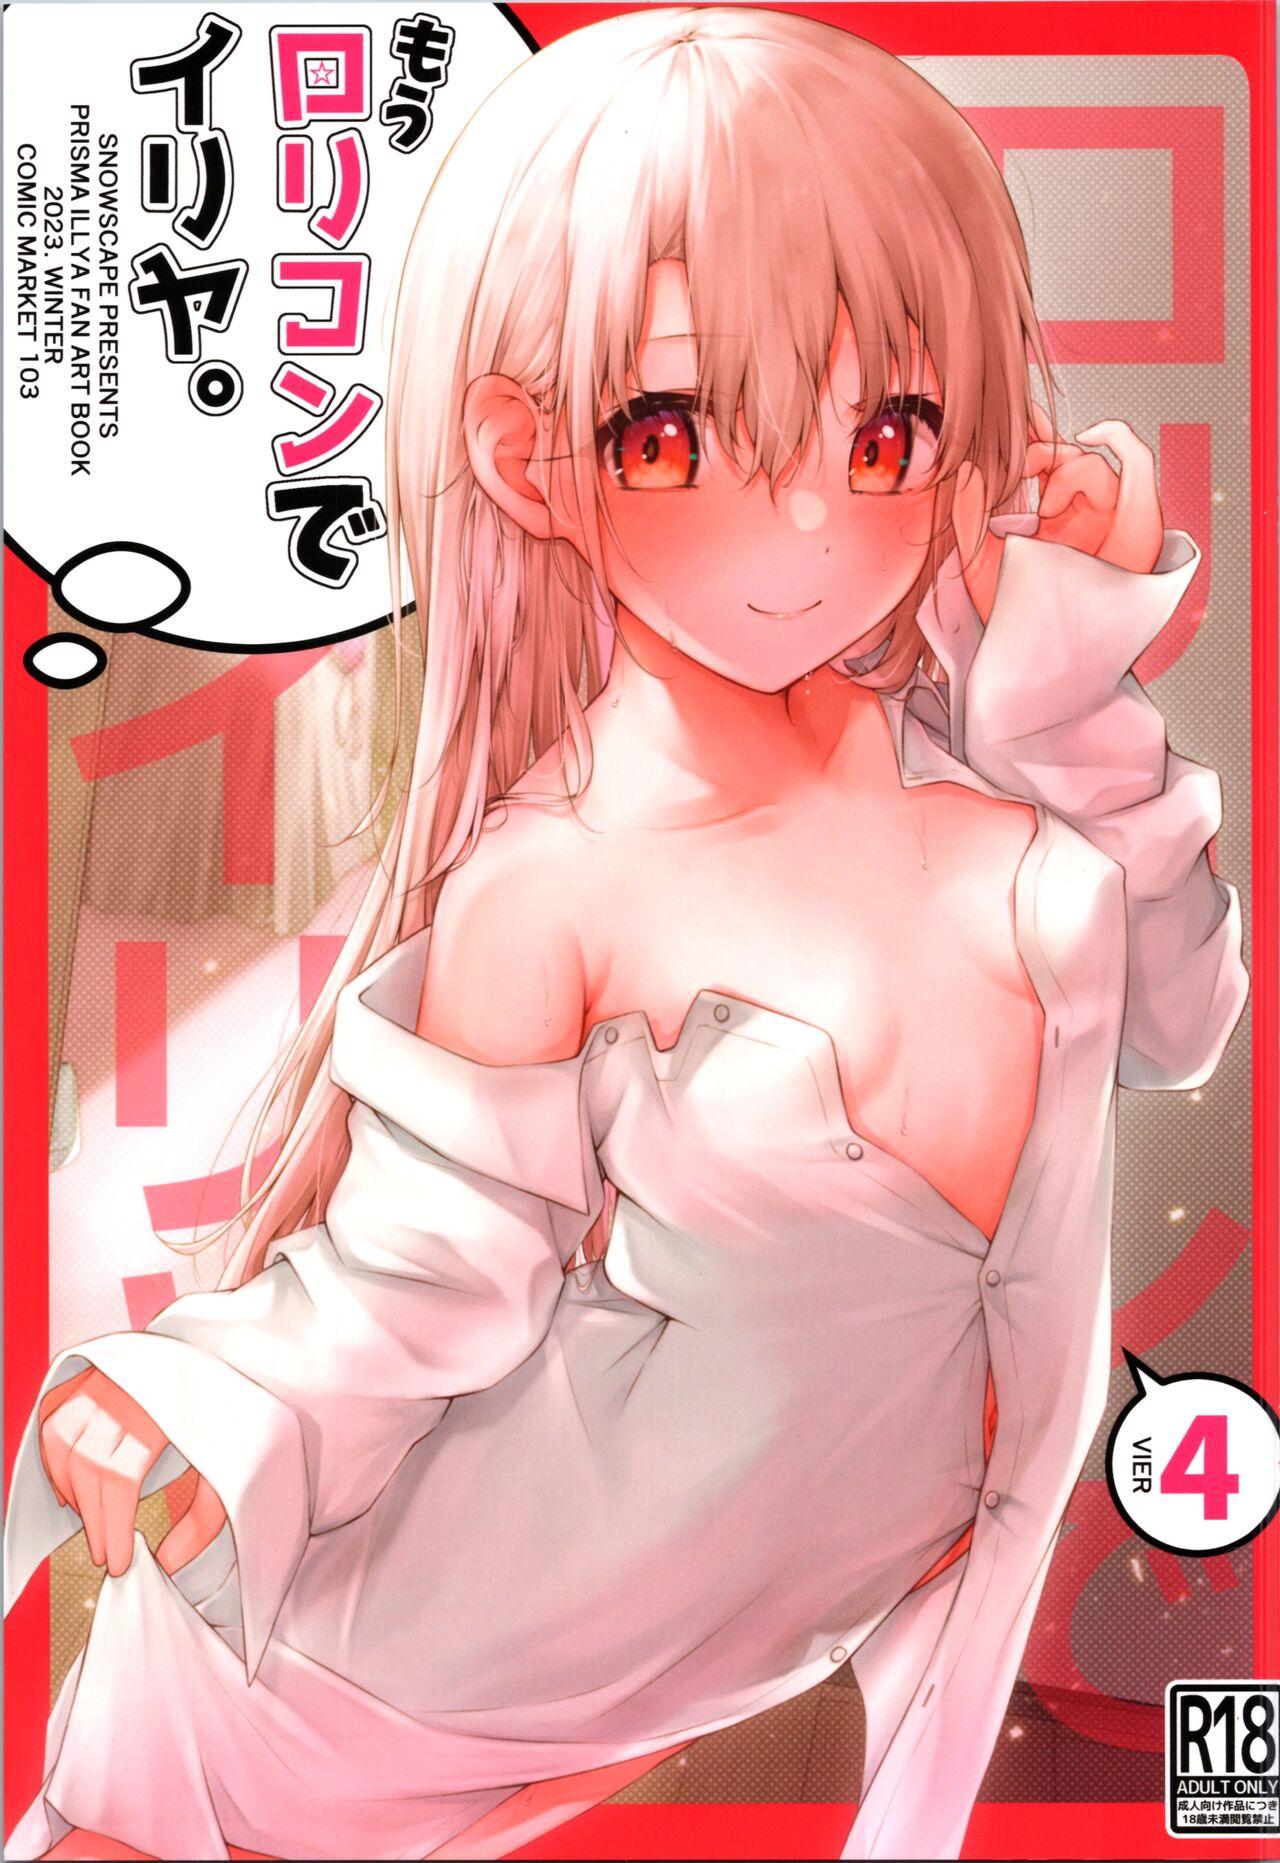 Cock Suckers Mou Lolicon de Illya. 4 - Fate kaleid liner prisma illya Close Up - Picture 1